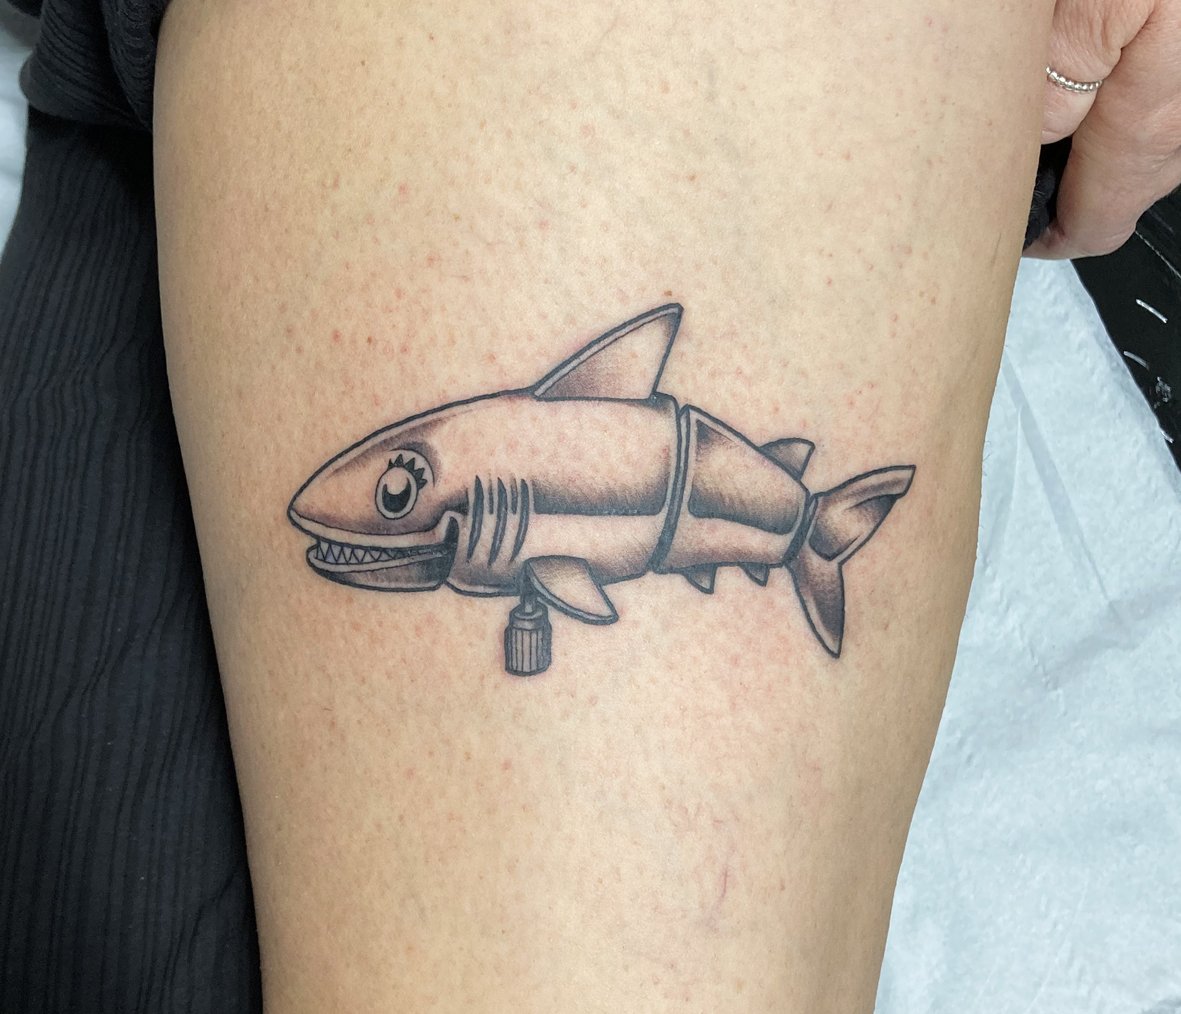 I saw your cute hammerhead and wanted to chime in with my first tattoo too  (got it yesterday) - brothers in tats :D : r/sharks